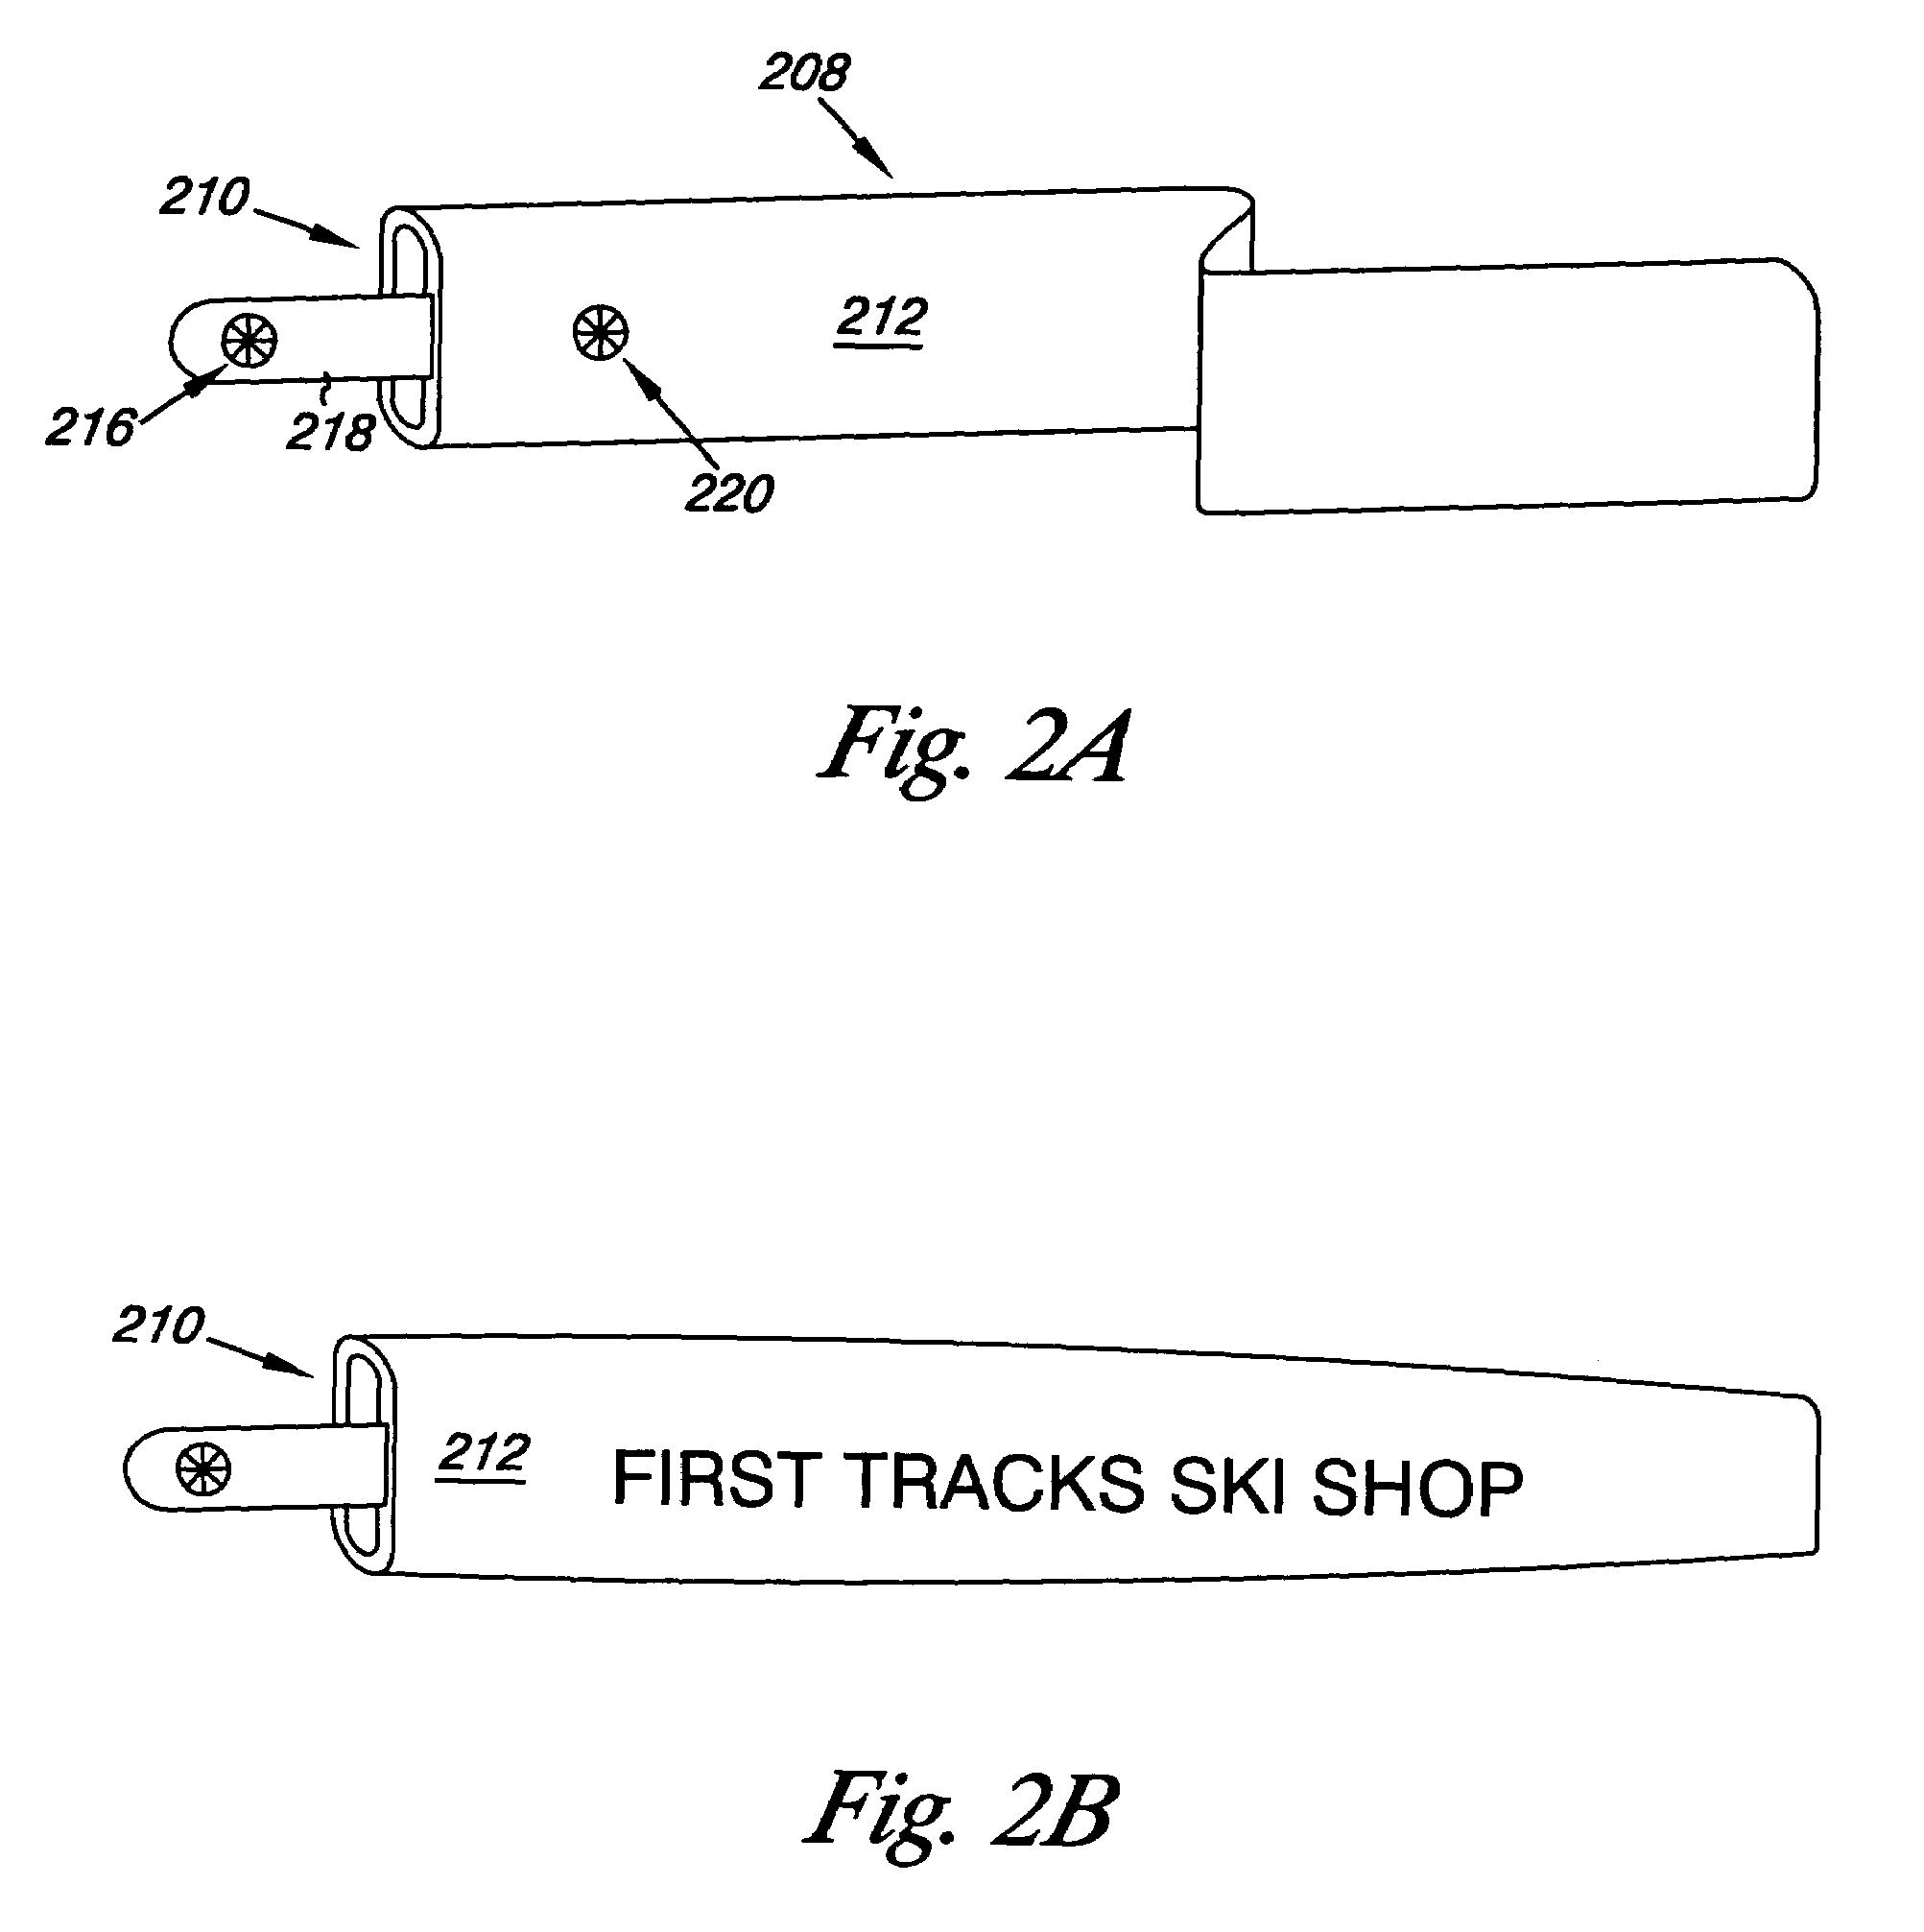 Displaying information on a gate system